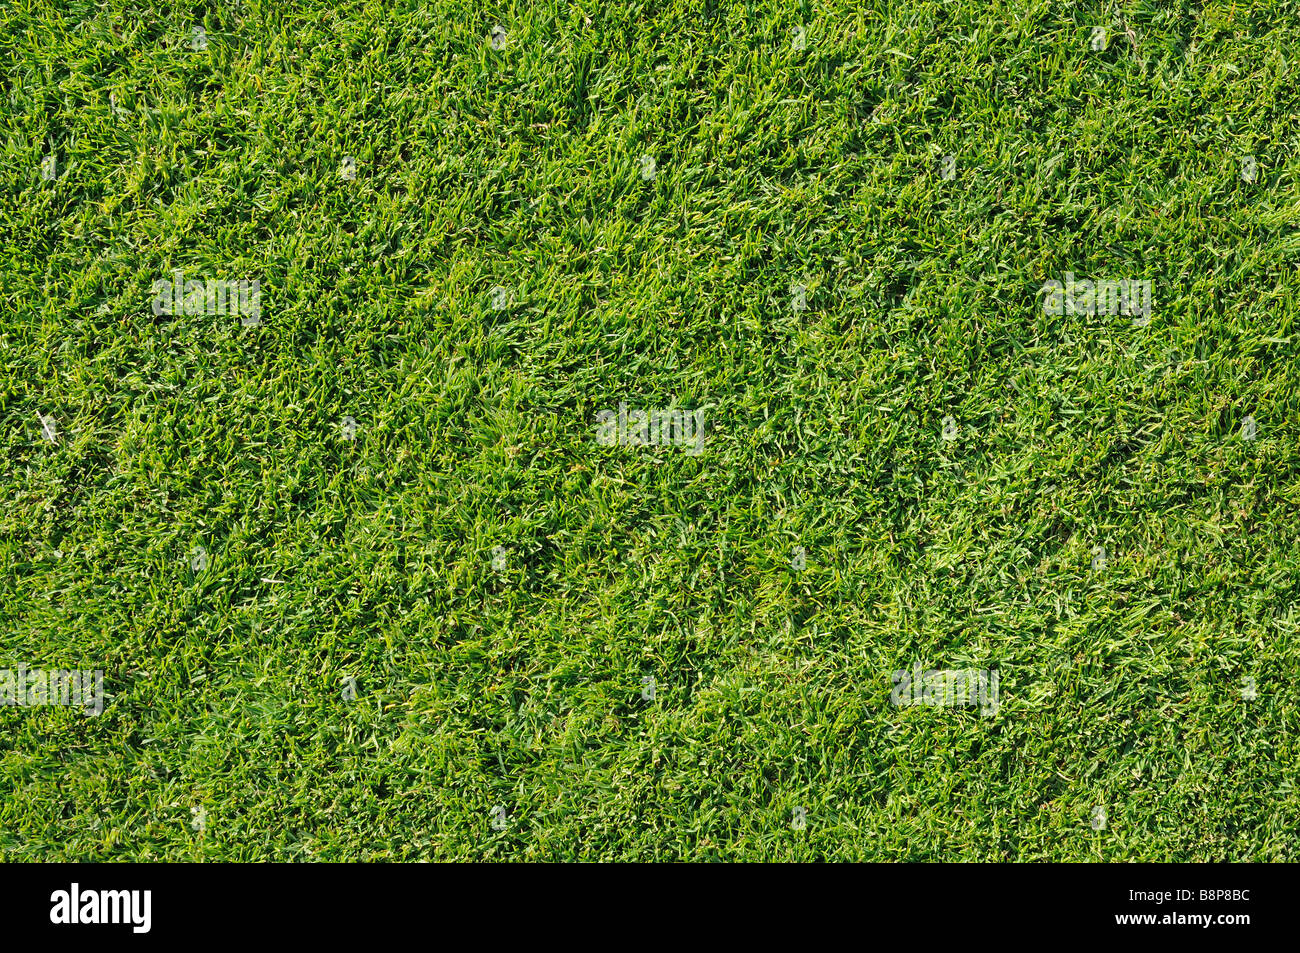 Green lawn, great for background and texture Stock Photo